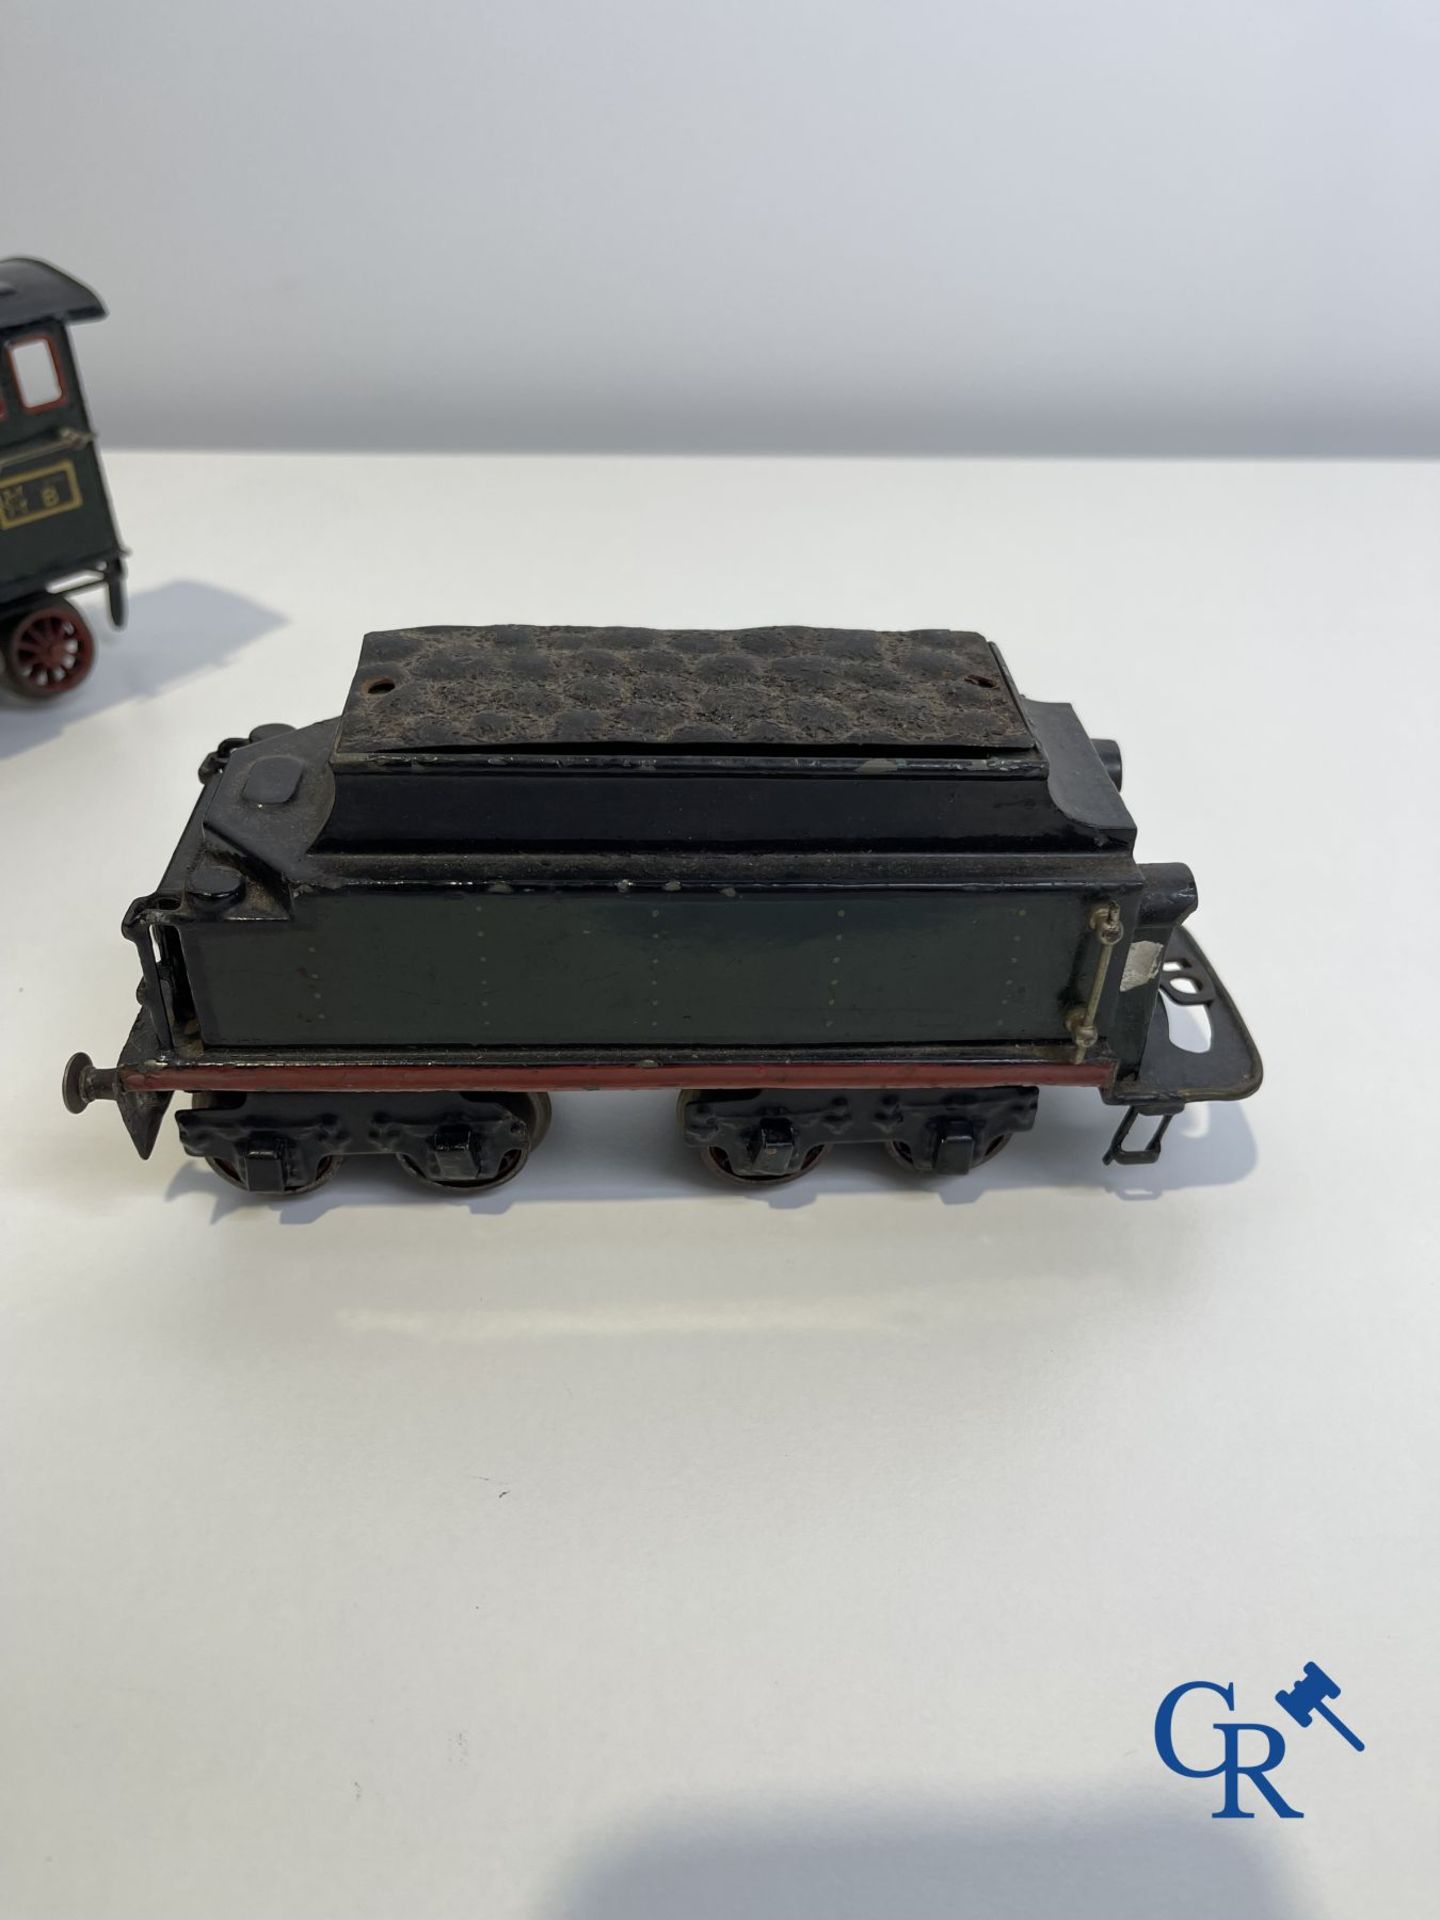 Old toys: Märklin, Locomotive with towing tender and dining car.
About 1930. - Image 14 of 32